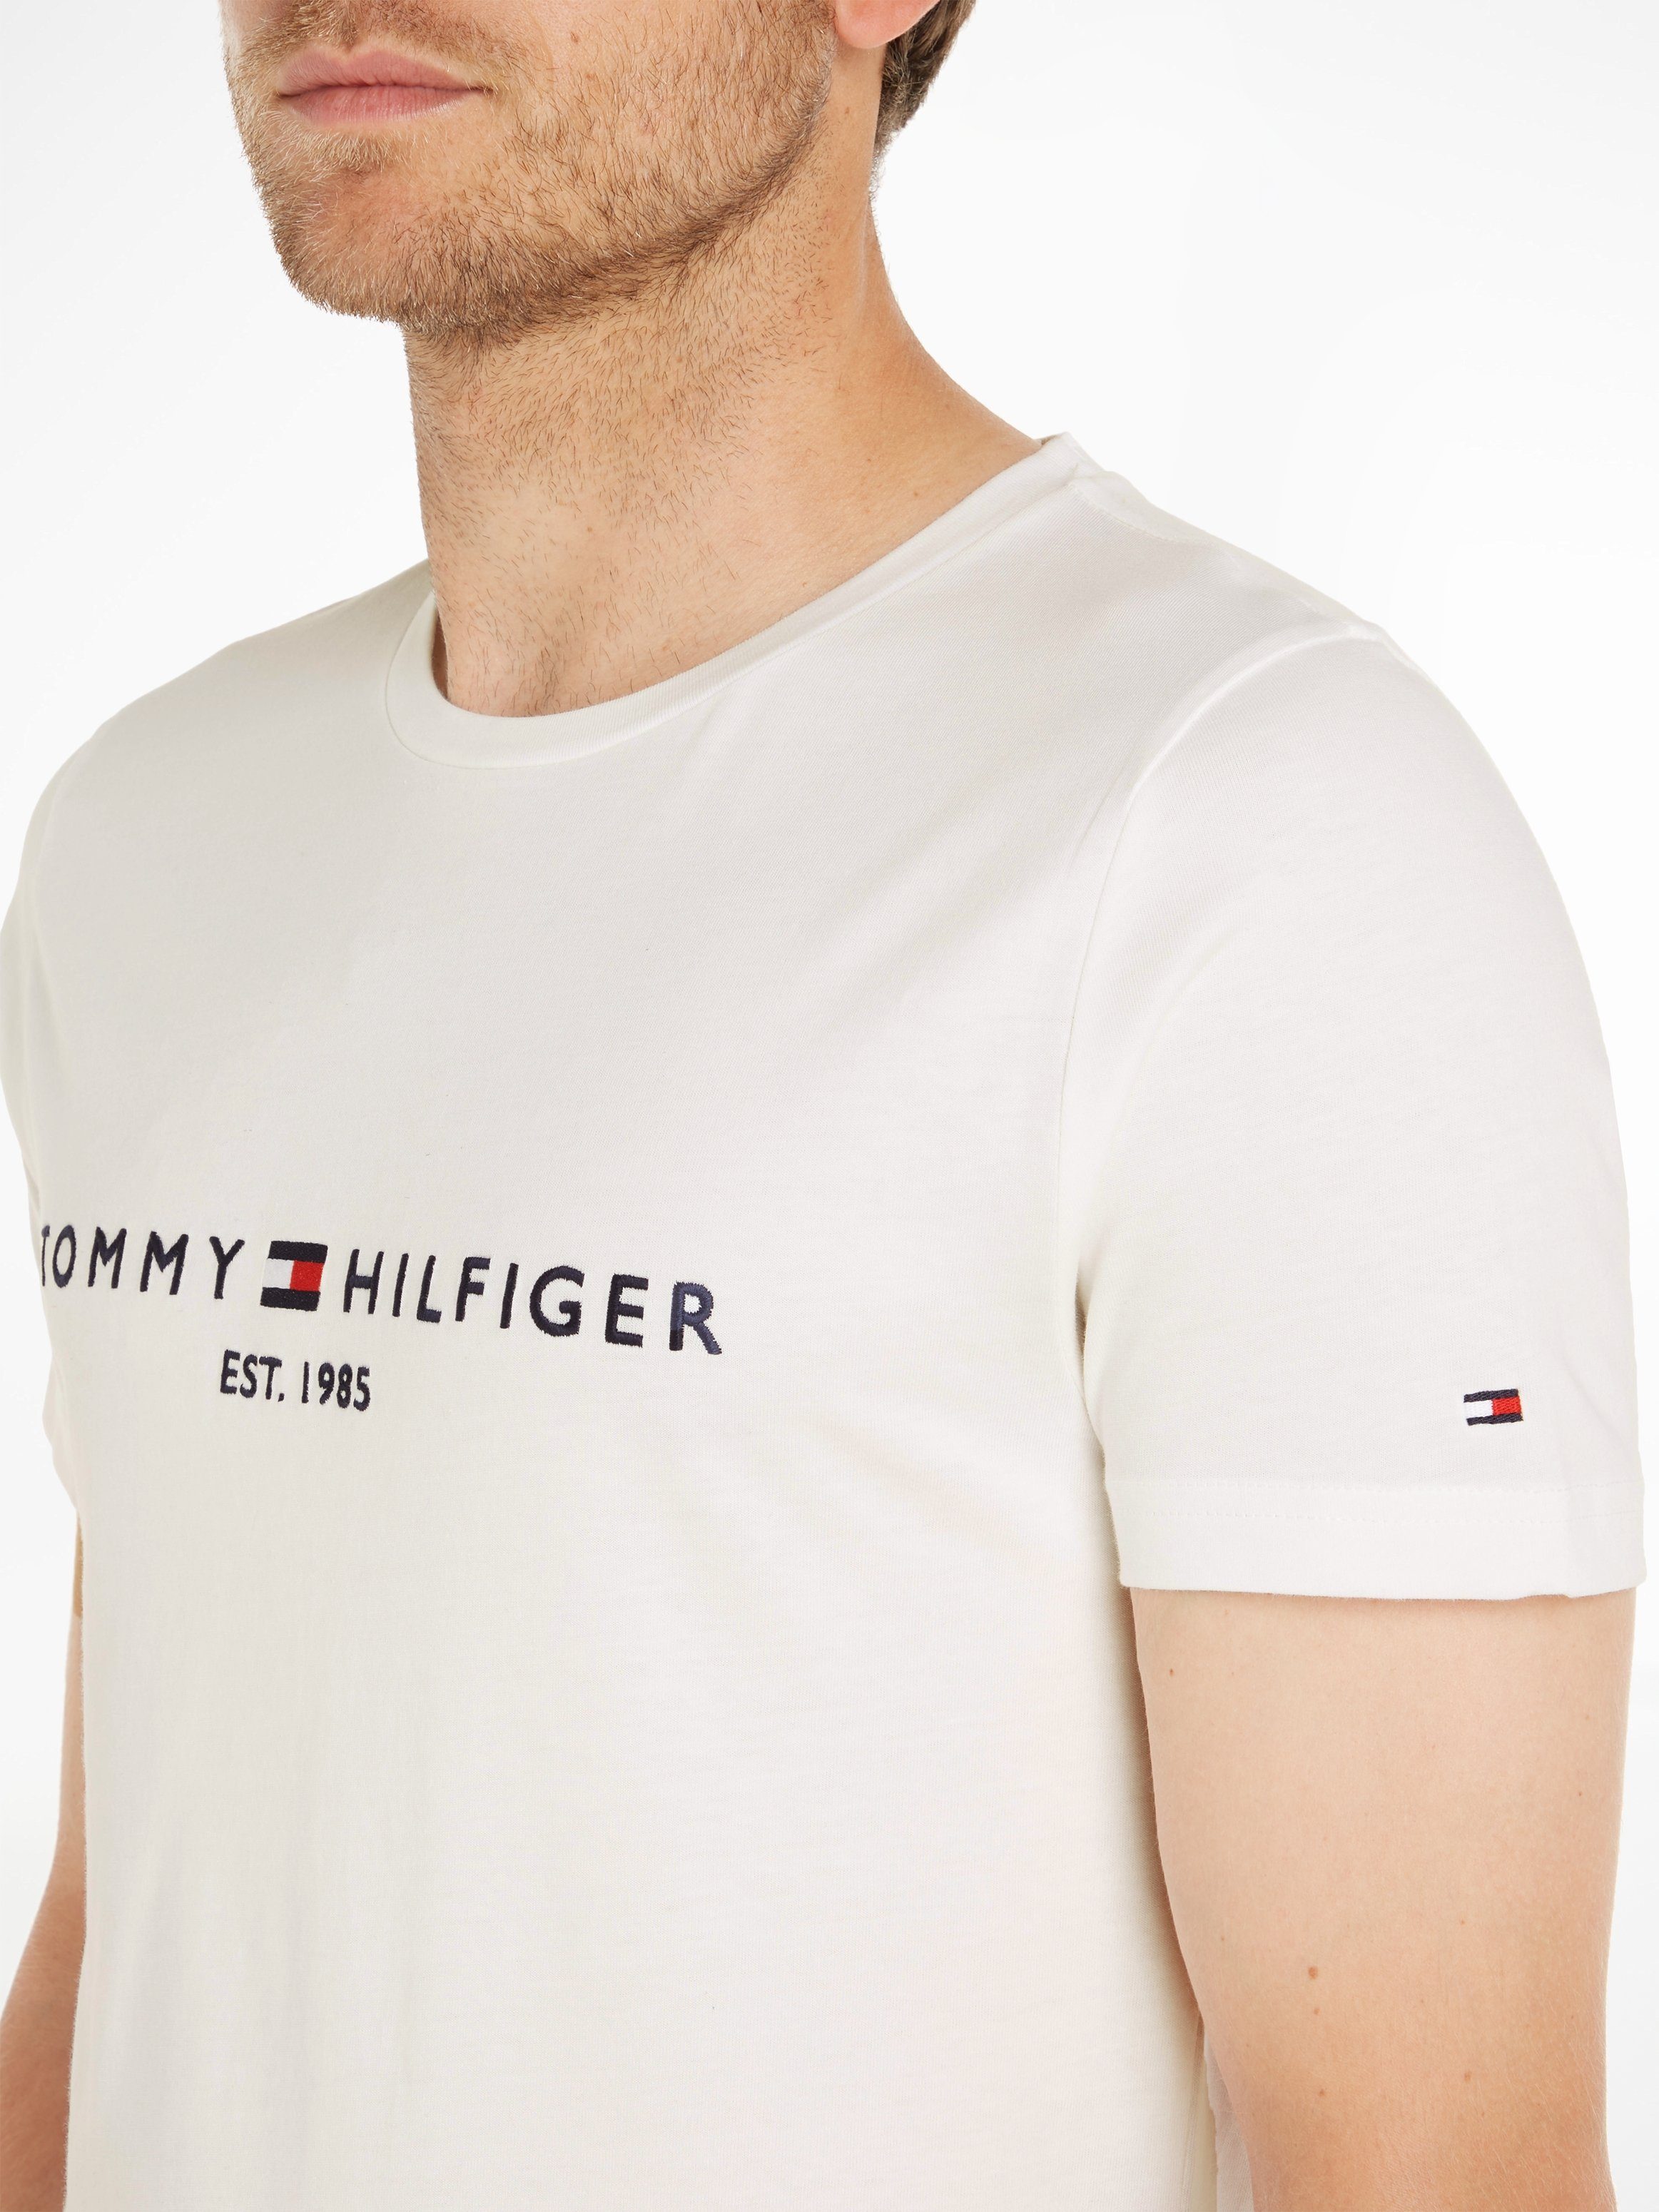 Tommy Hilfiger T-Shirt TOMMY FLAG HILFIGER TEE white snow